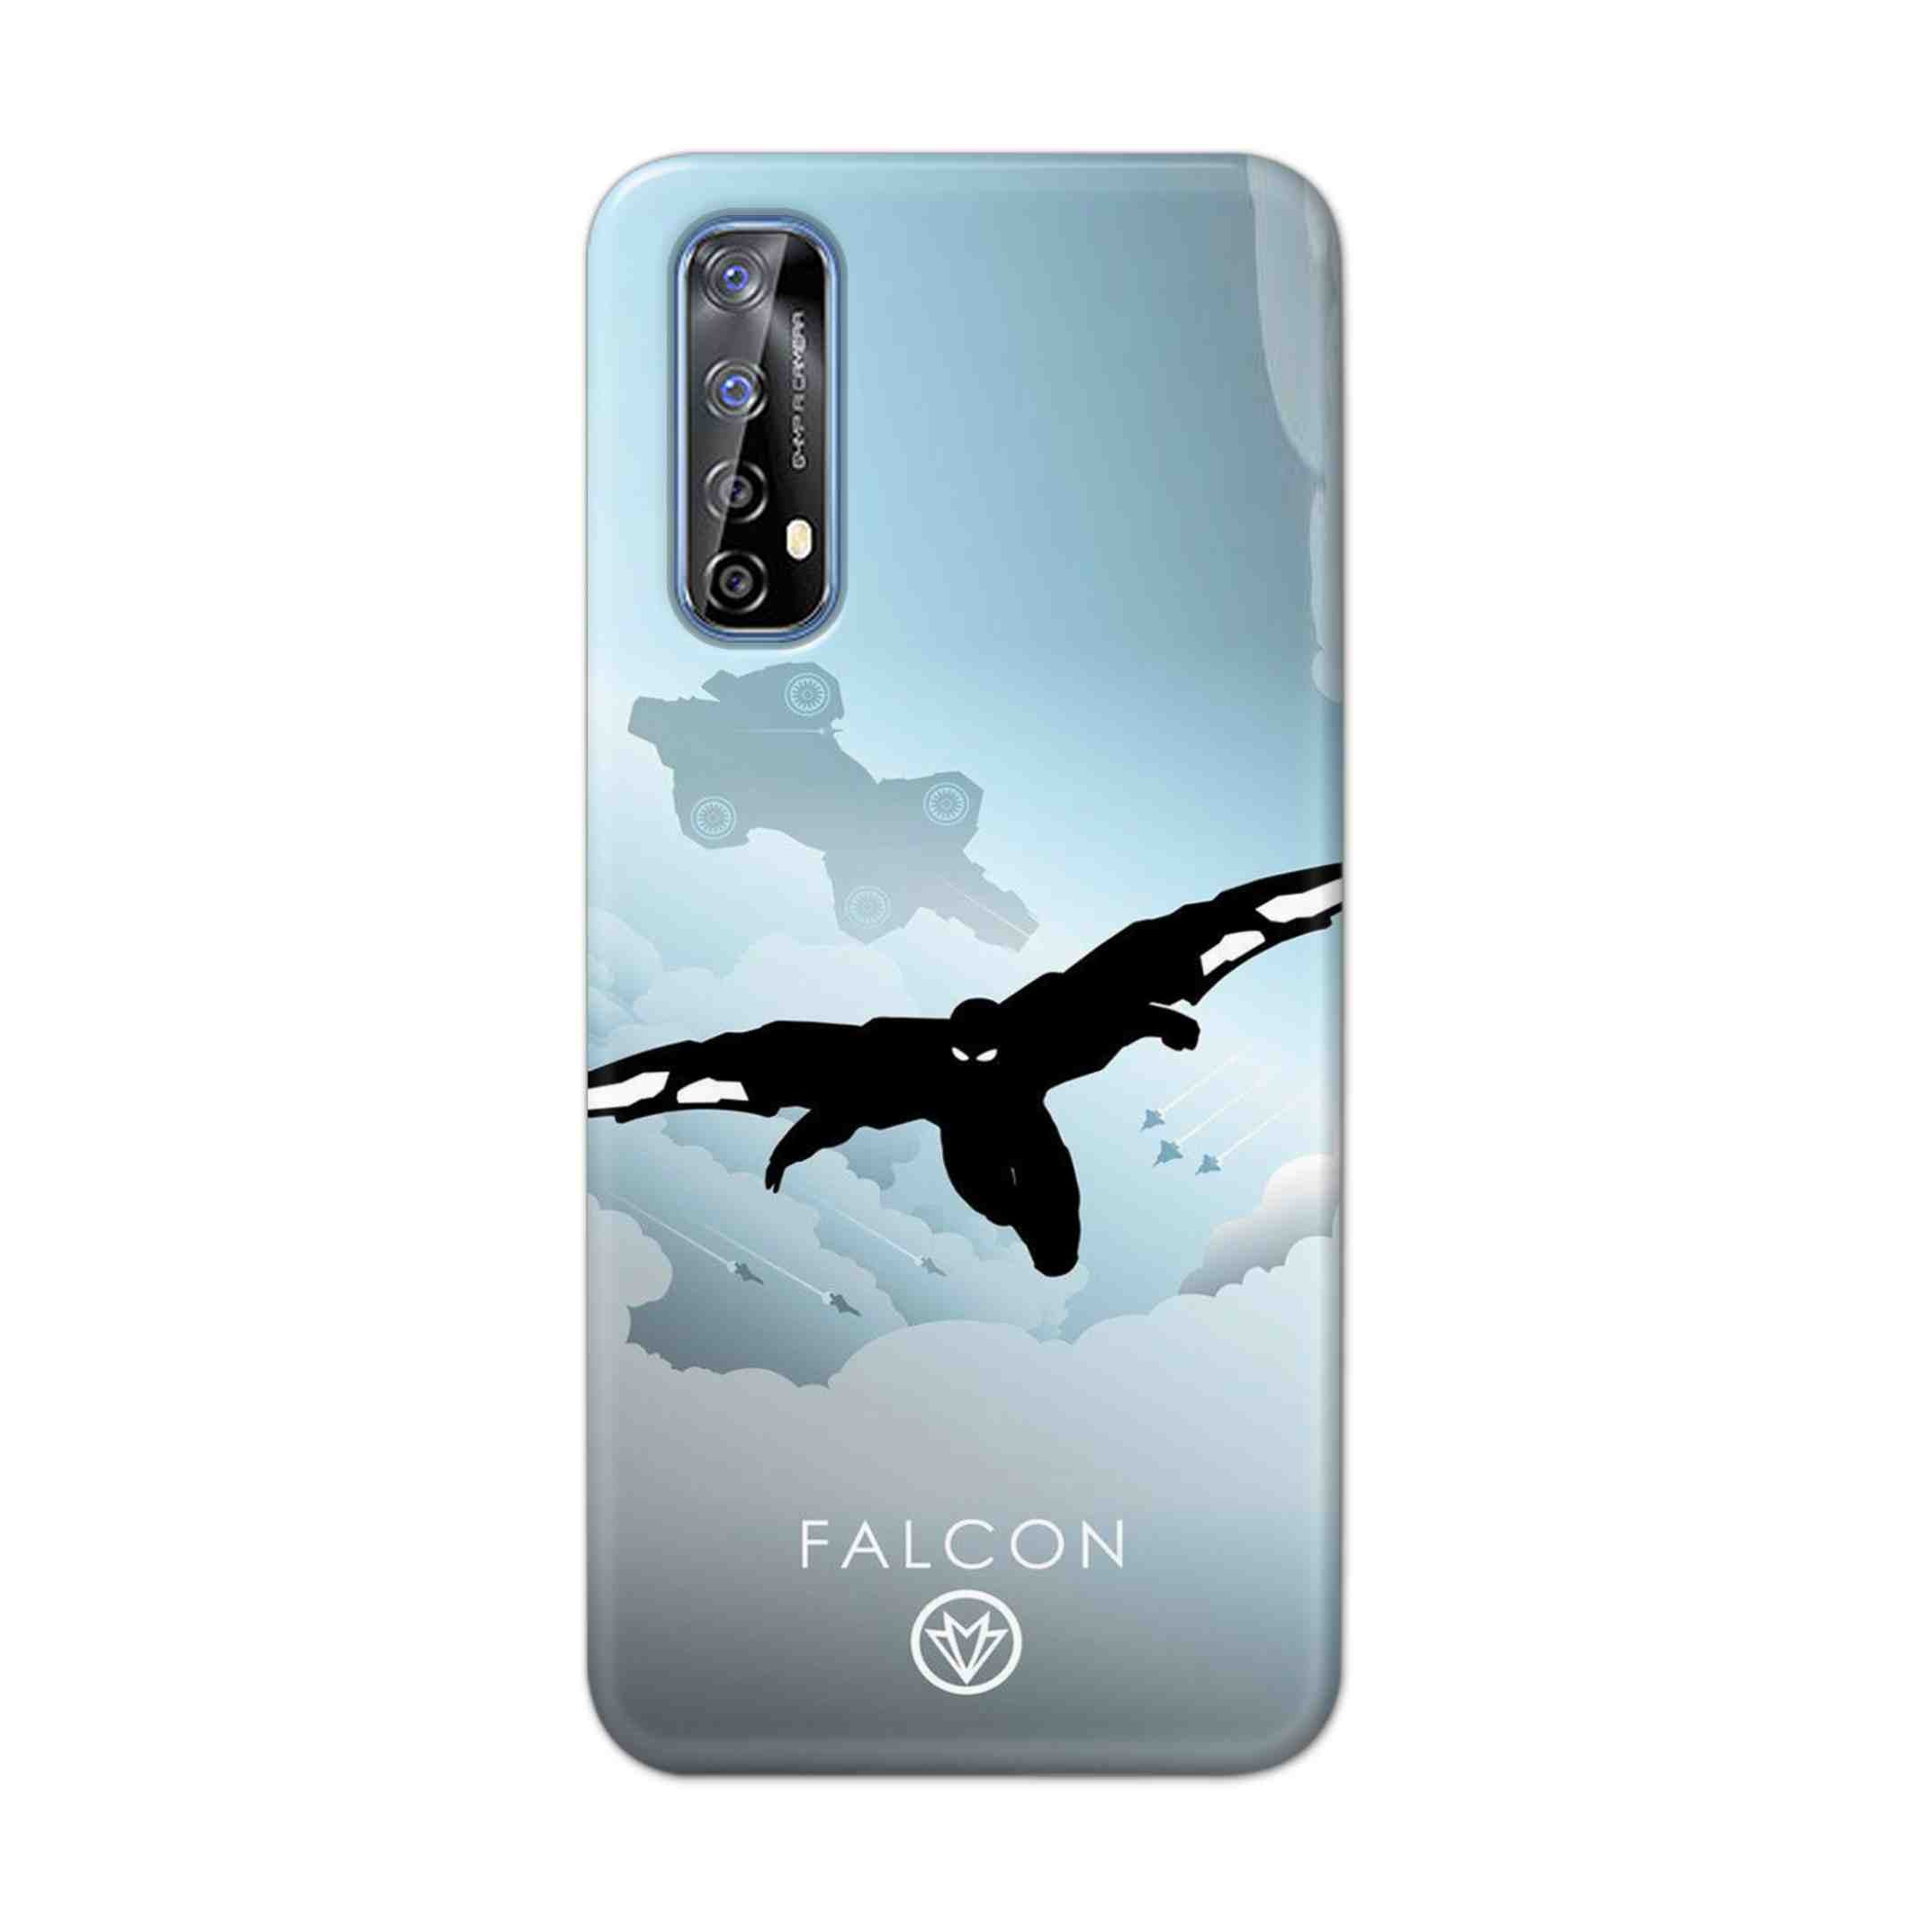 Buy Falcon Hard Back Mobile Phone Case Cover For Realme 7 Online